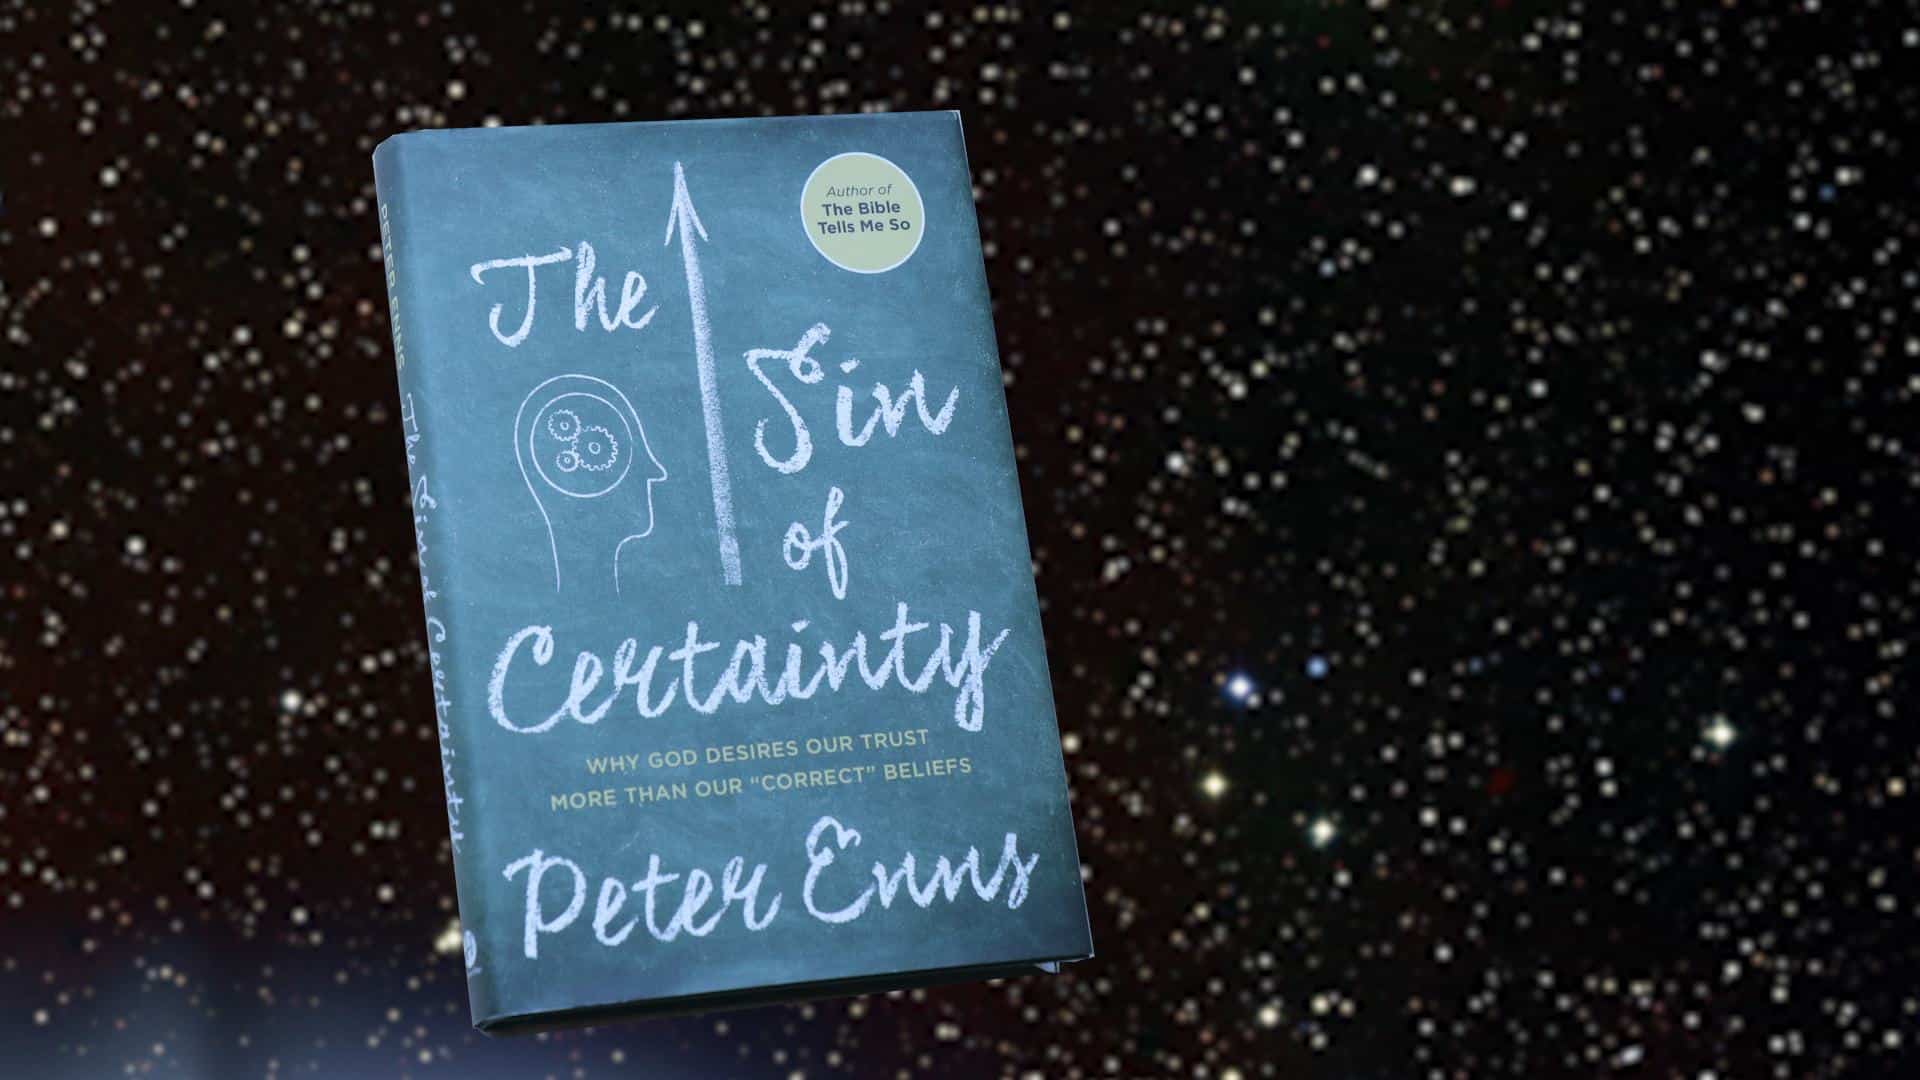 The Sin of Certainty video trailer, in which I am prominently featured